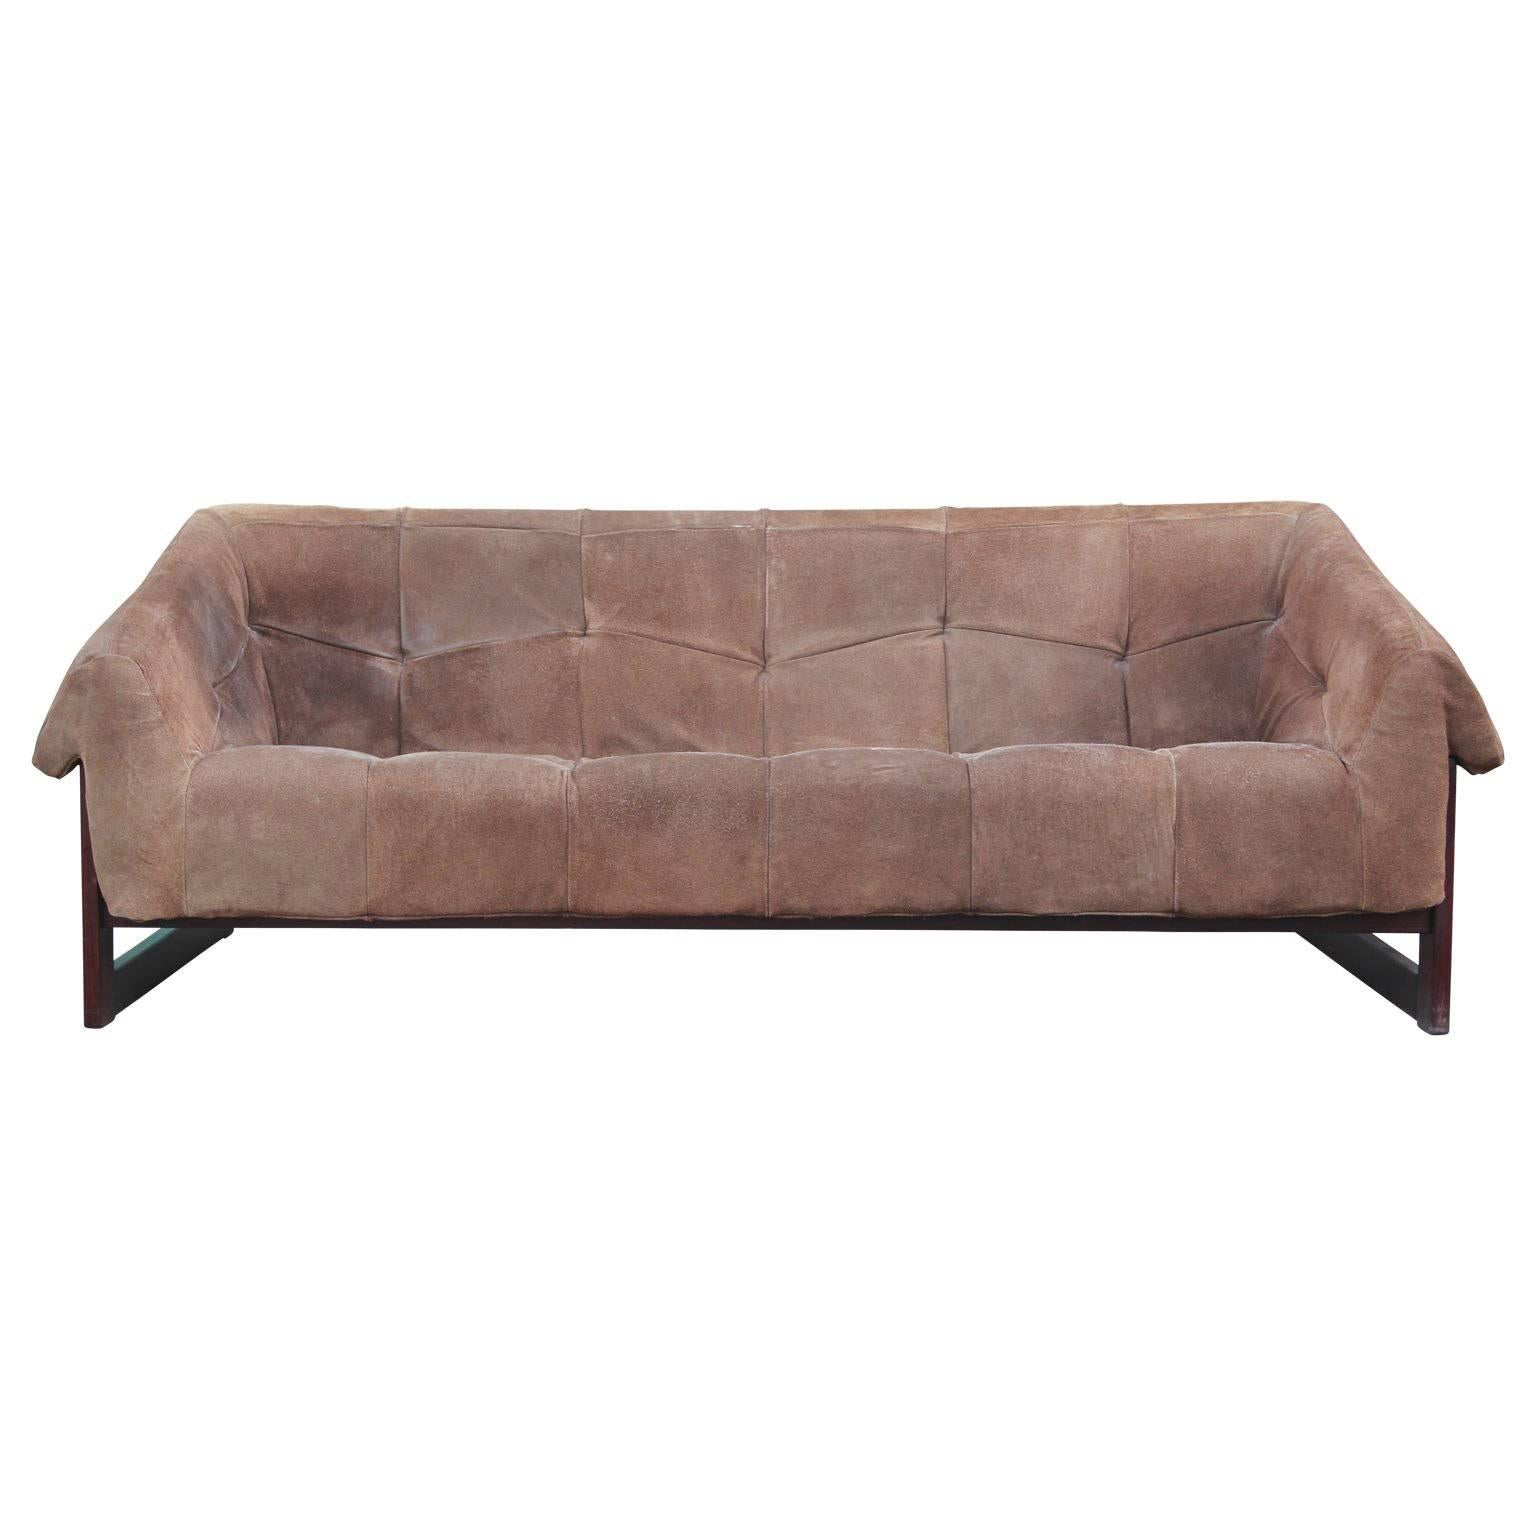 Modern Percival Lafer Brown Suede and Rosewood Lounge Sofa w/ Leather Strapping